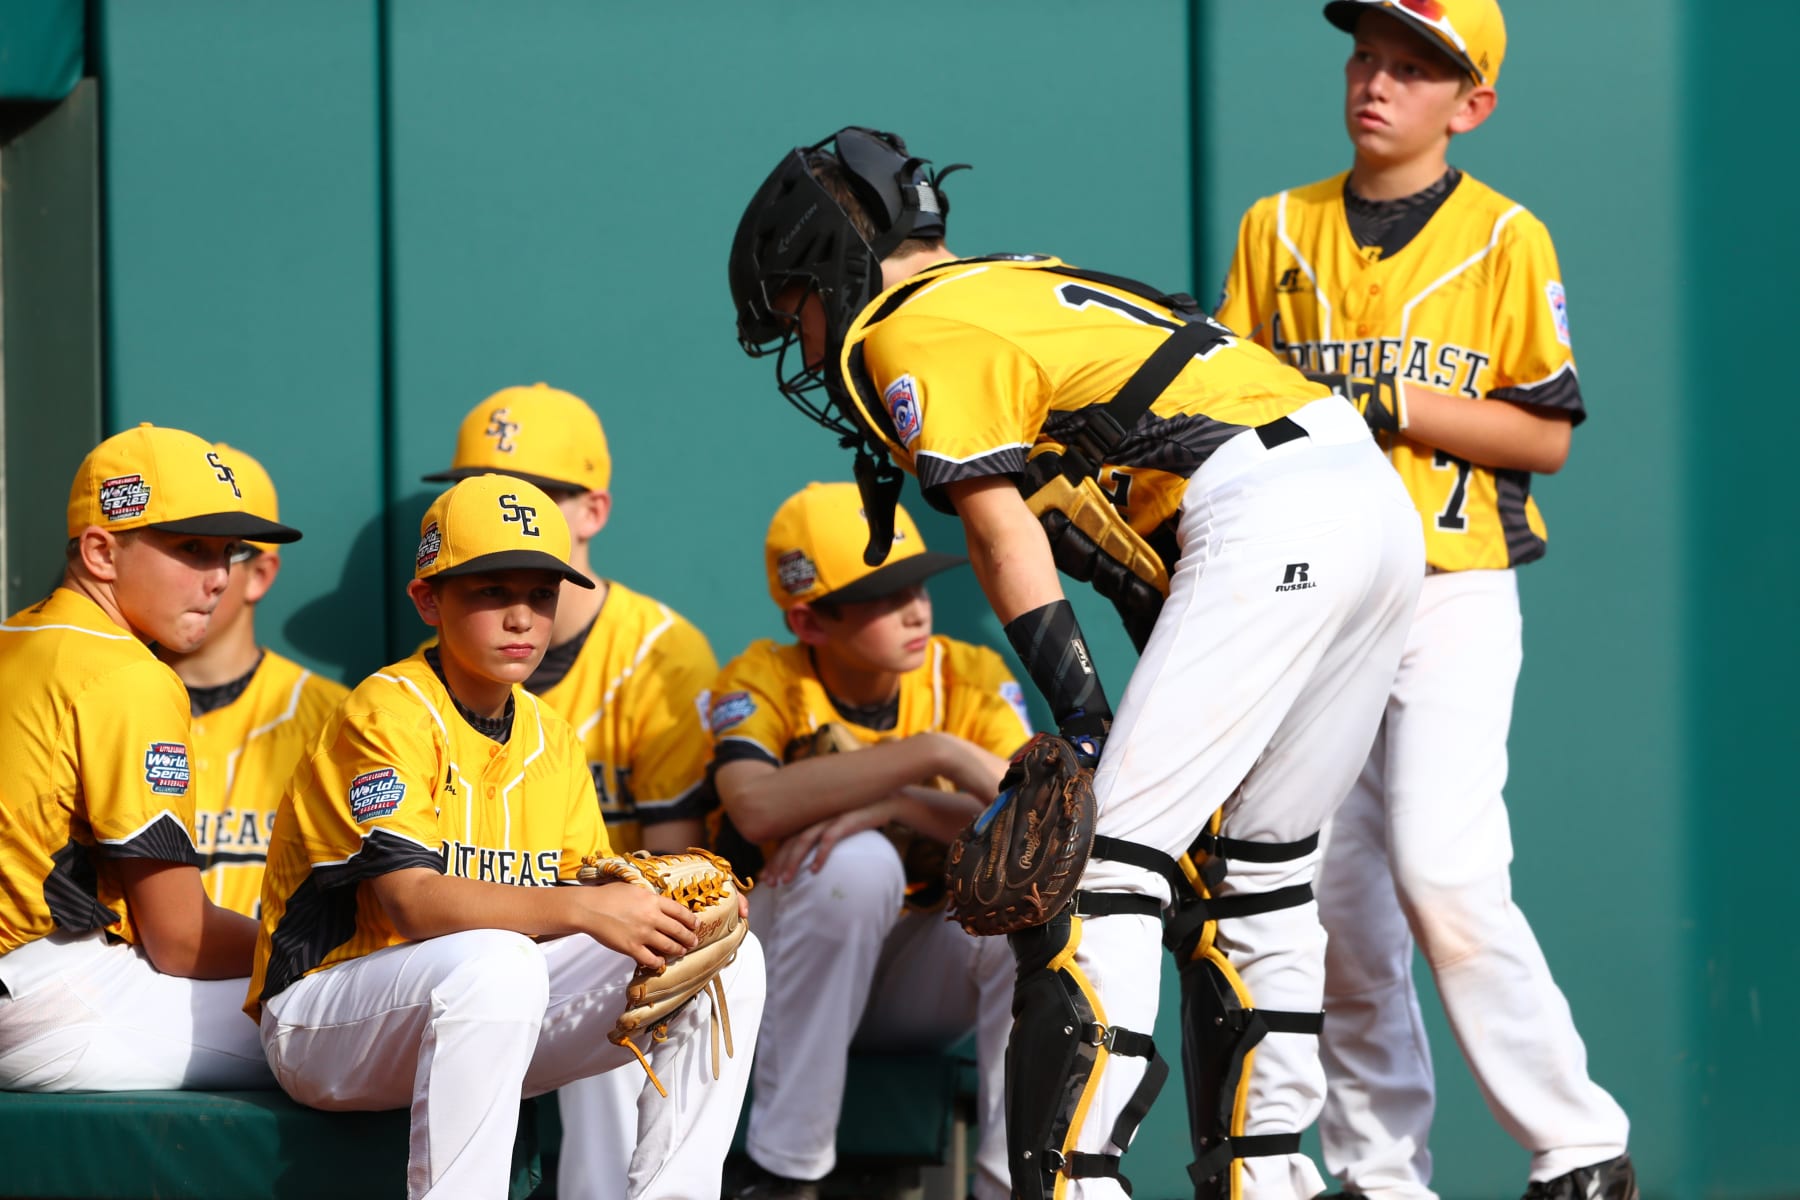 The magic of the Little League World Series returns to ESPN